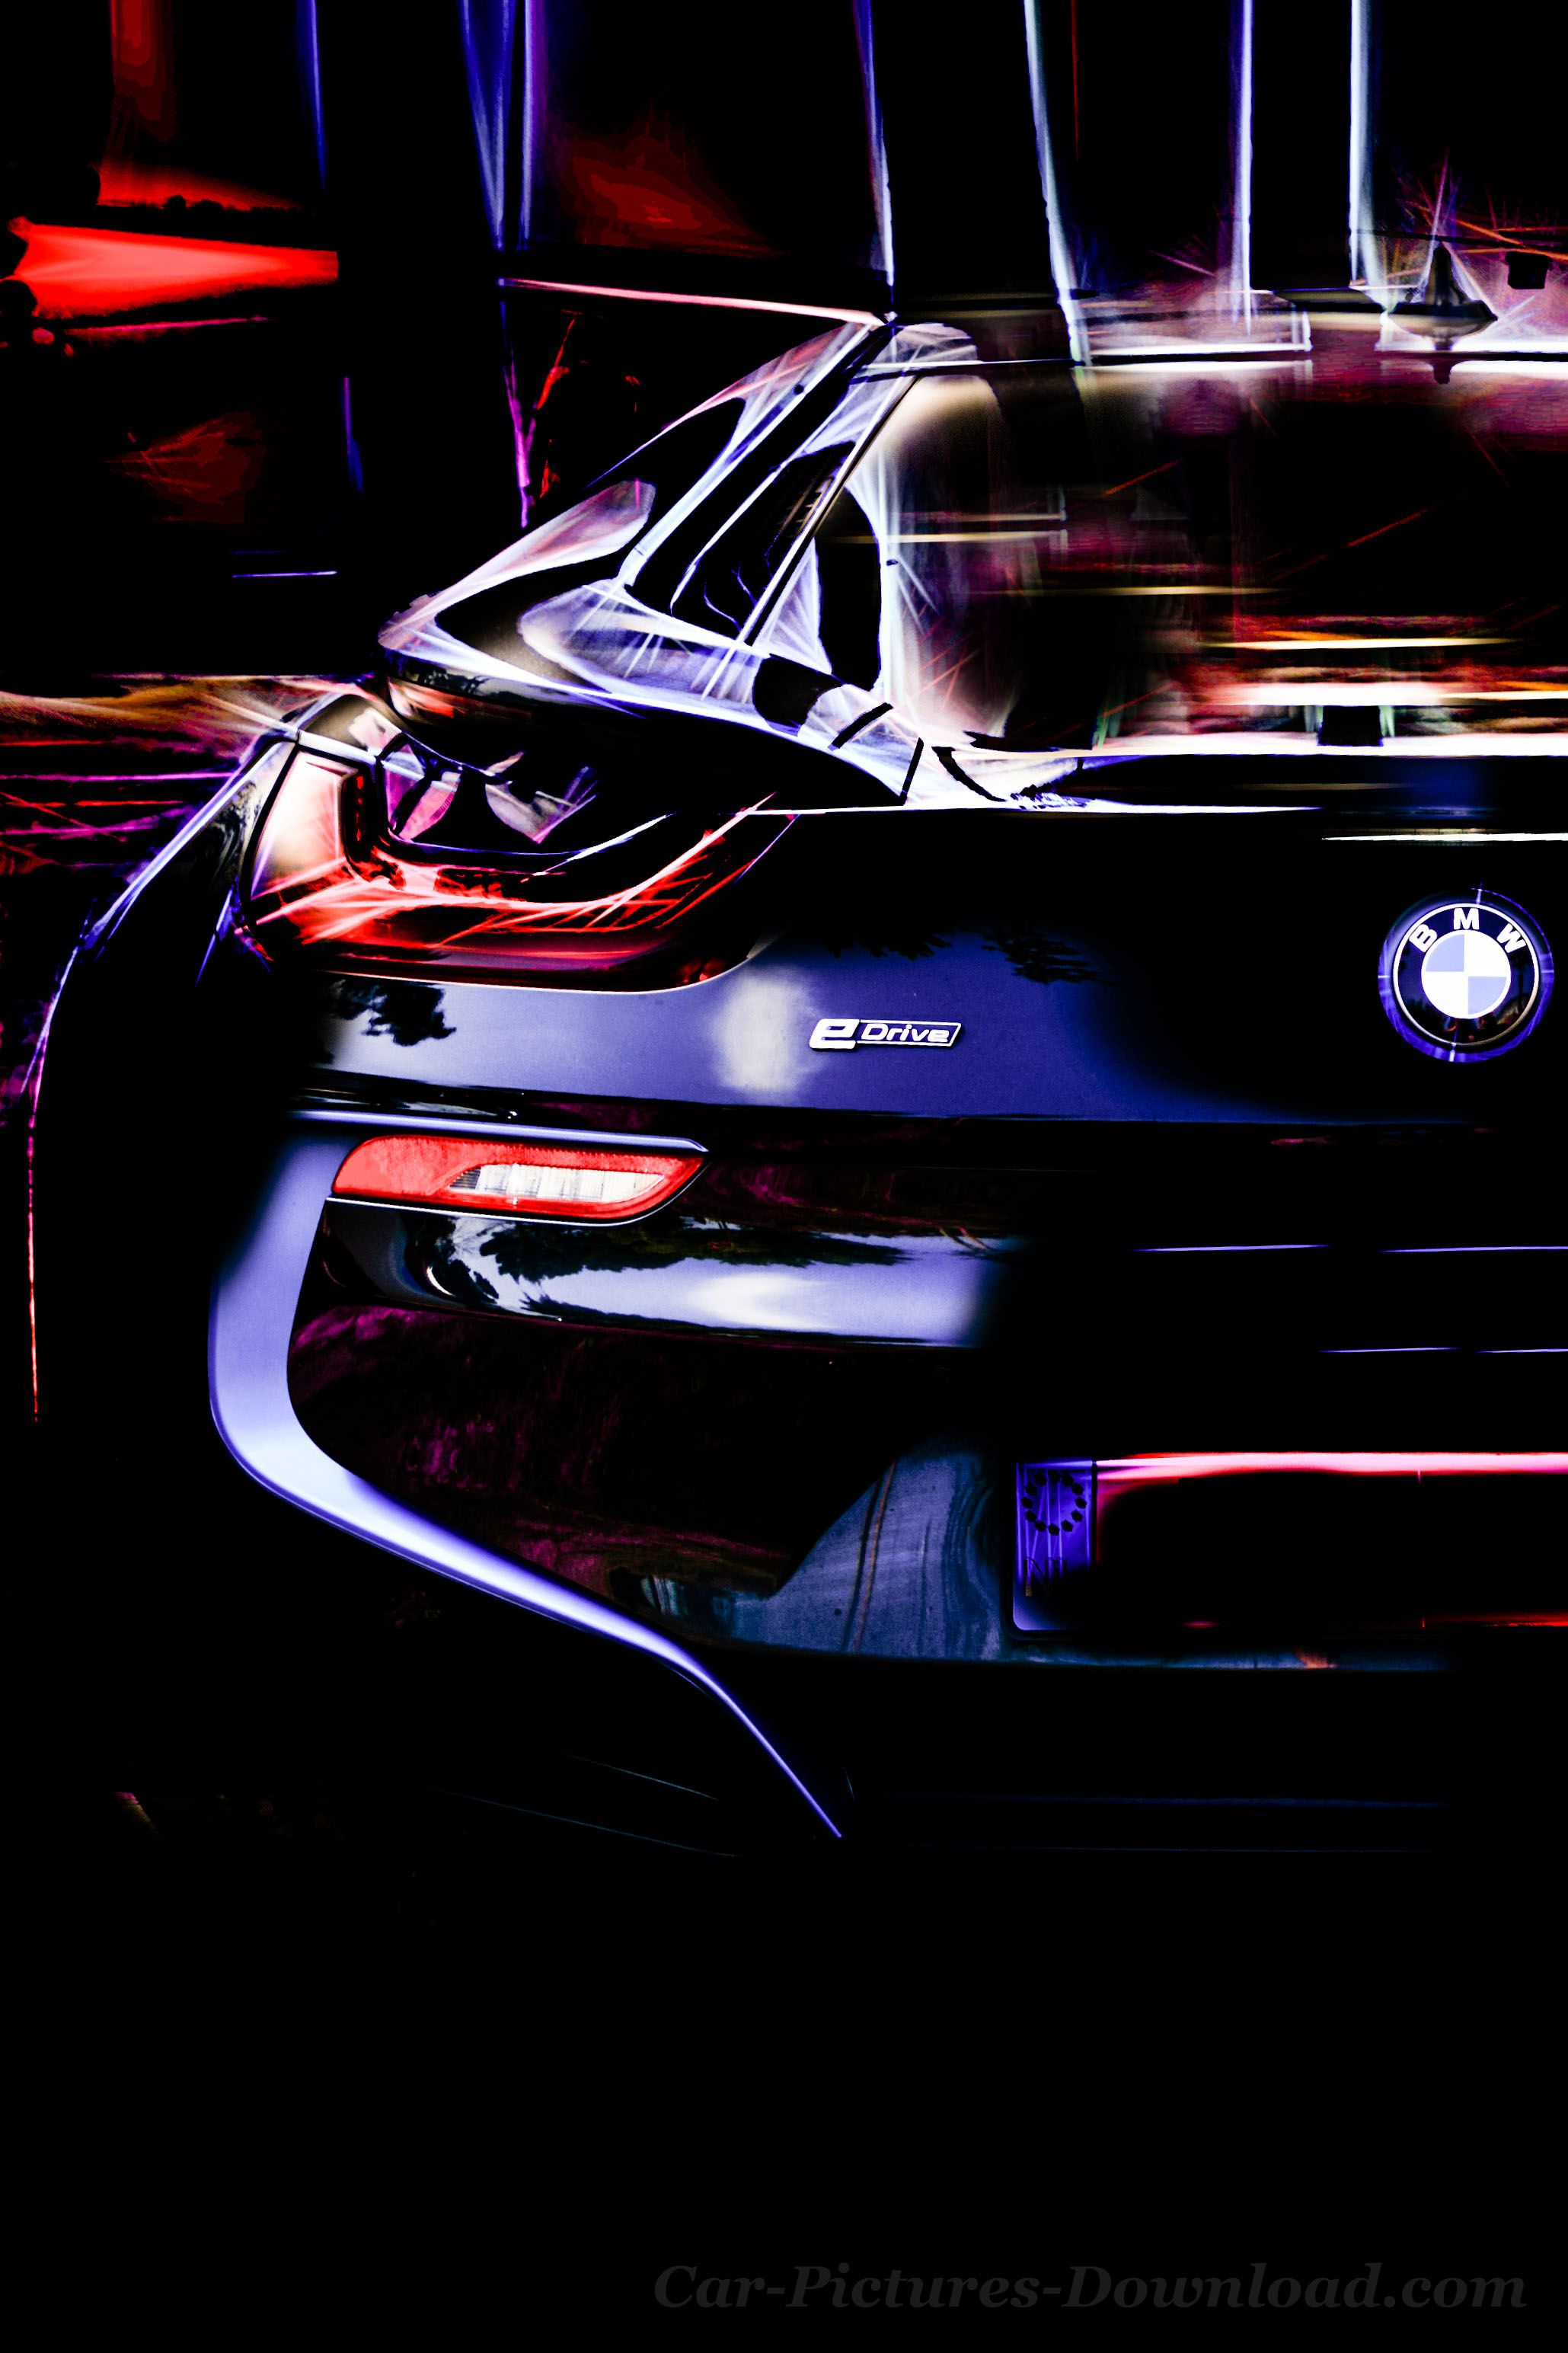 BMW i8 Wallpaper Picture Ultra HD Image To Download